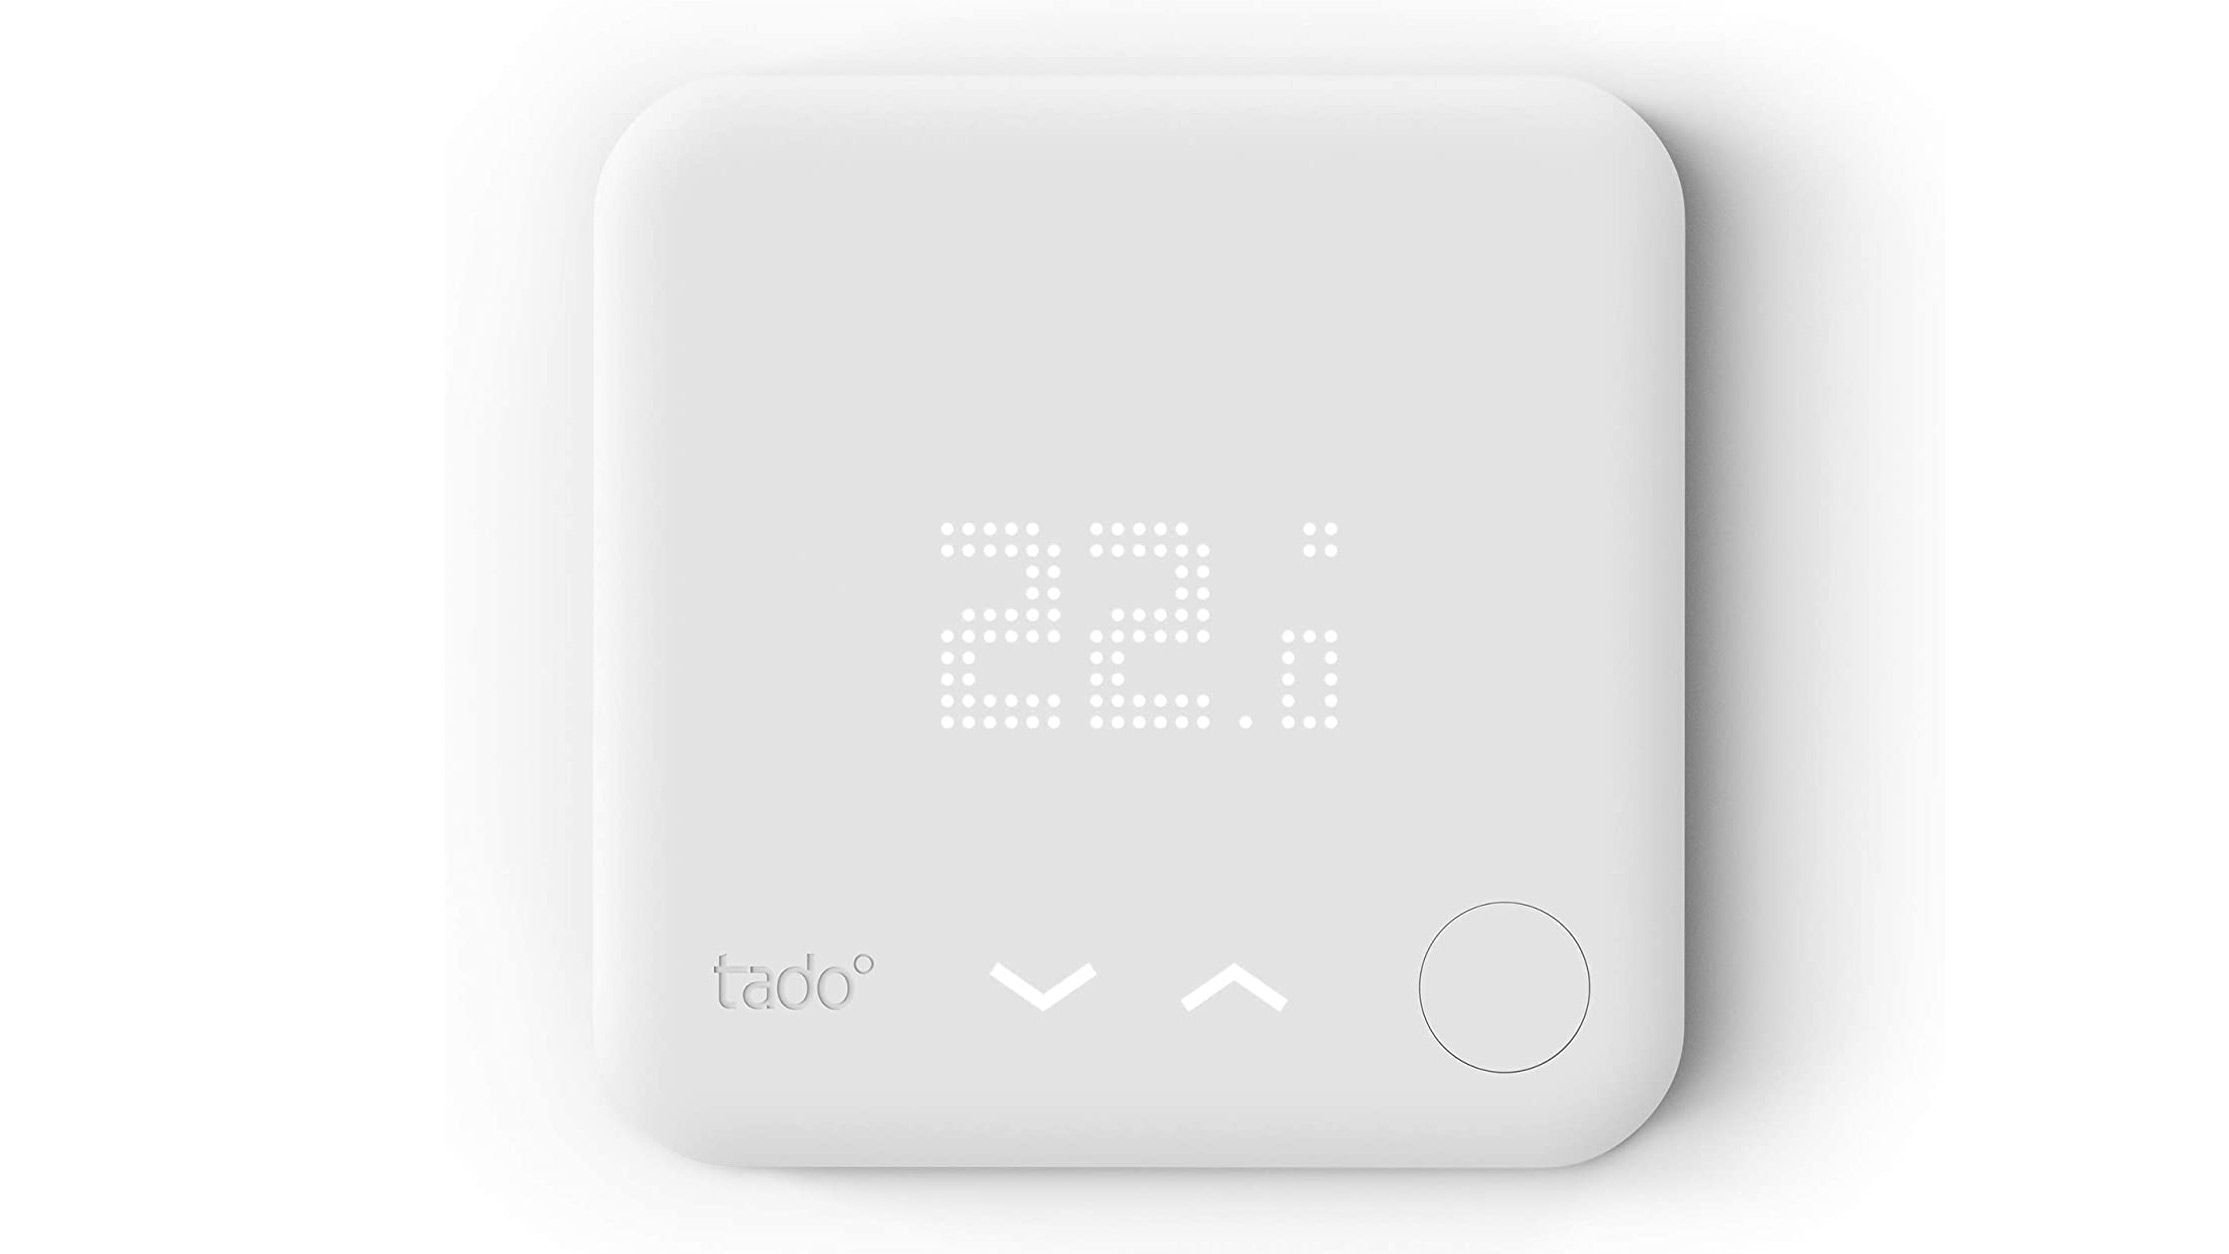 The Tado smart thermostat on a white background